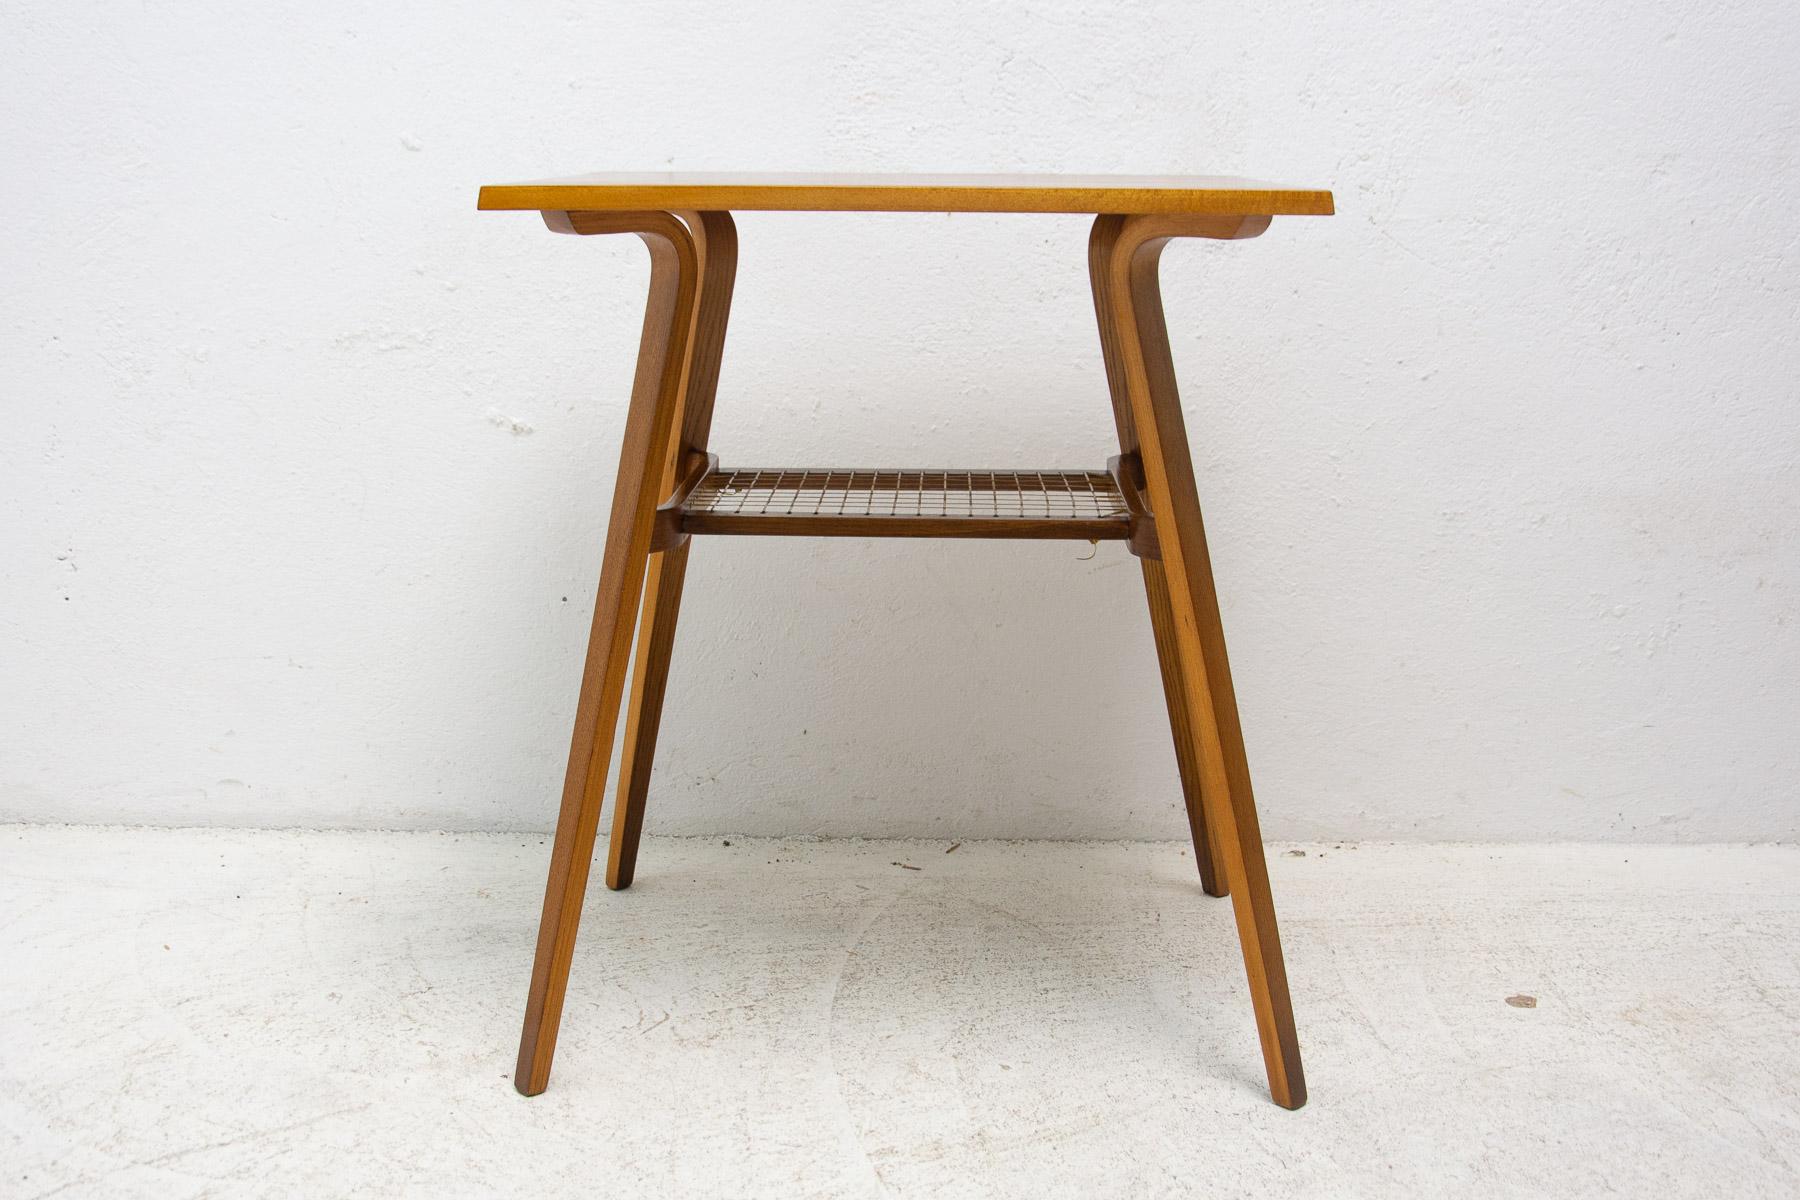 This mid century side table was made in the former Czechoslovakia in the 1970´s. It was produced by Drevopodnik Holešov company. It´s made of oak. In very good Vintage condition, shows slight signs of age and using. Associated with world-renowned